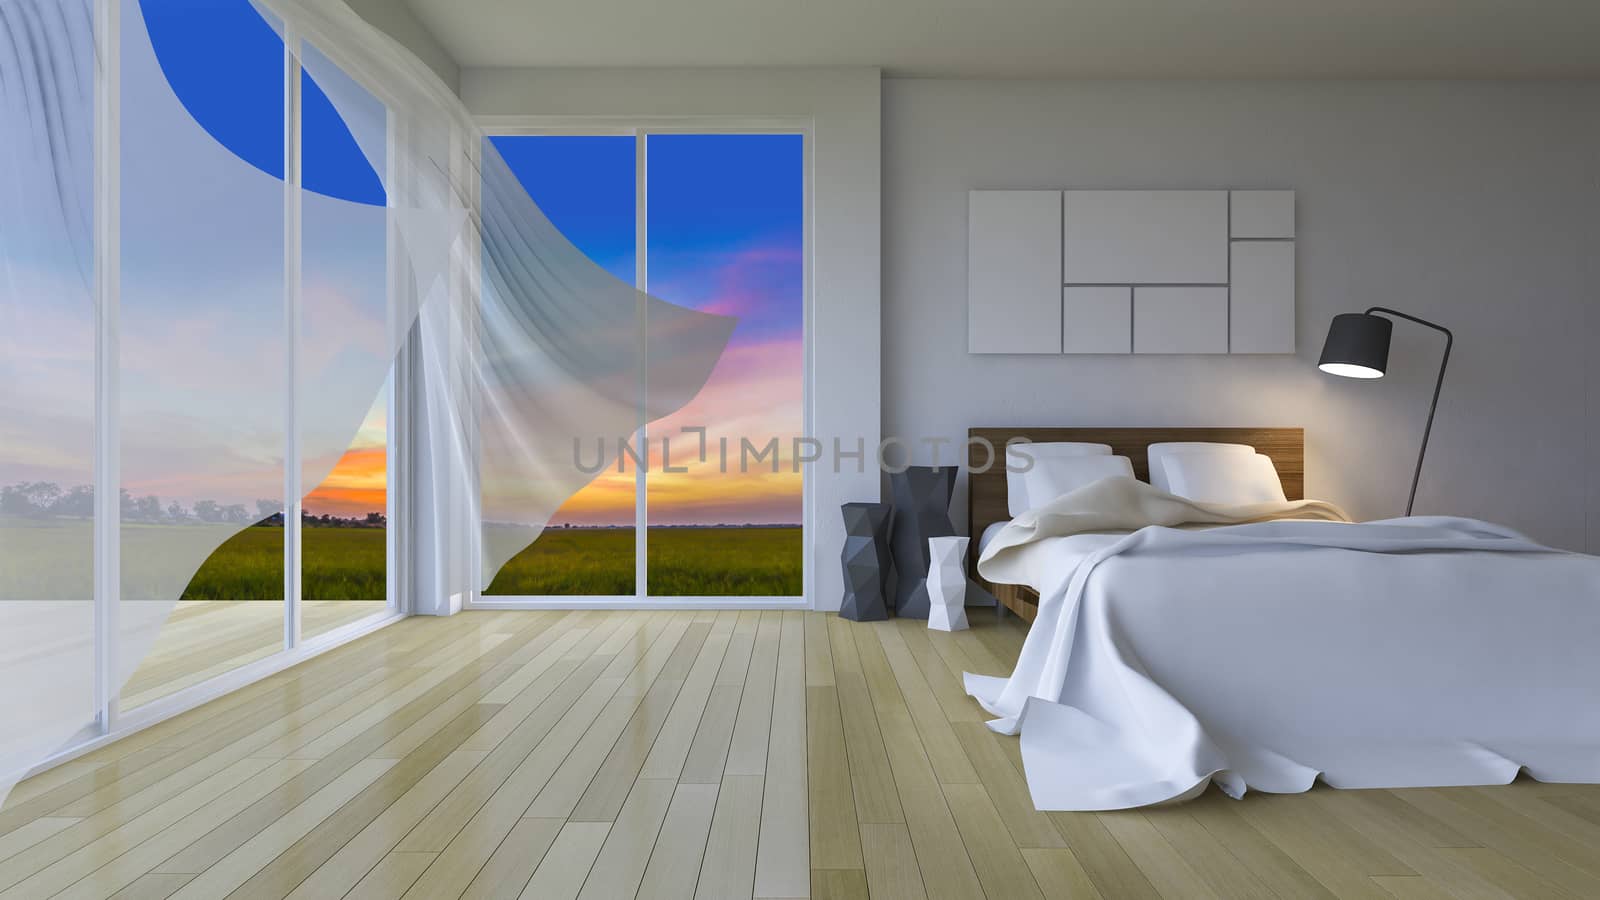 3ds rendering image of seaside room in sunset and sunrise with twilight. blank photo frame on the walls